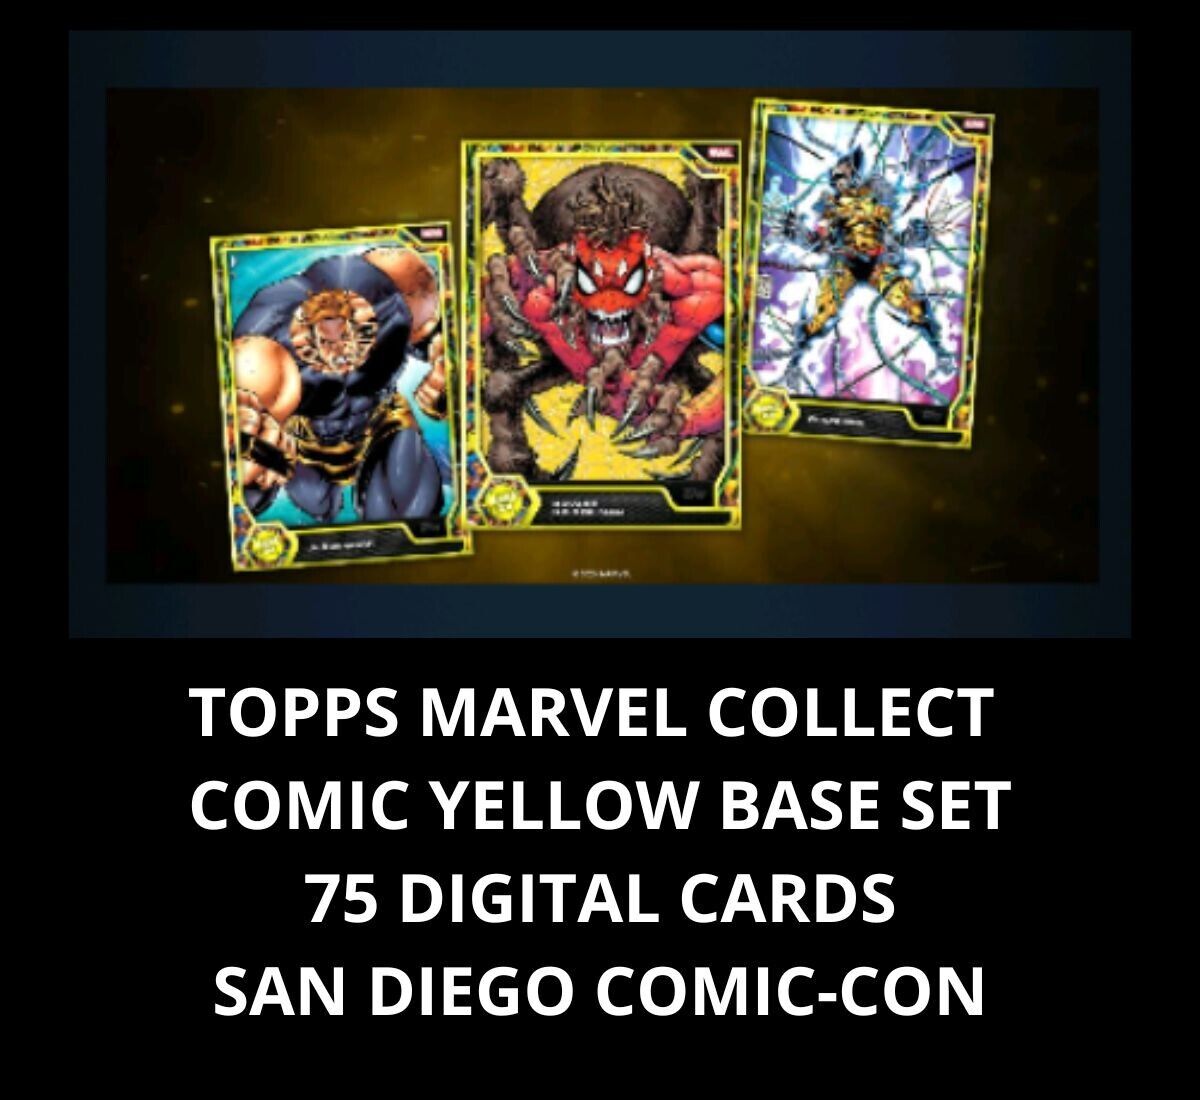 TOPPS MARVEL COLLECT  COMIC YELLOW BASE SET 75 DIGITAL CARDS SAN DIEGO COMIC CON